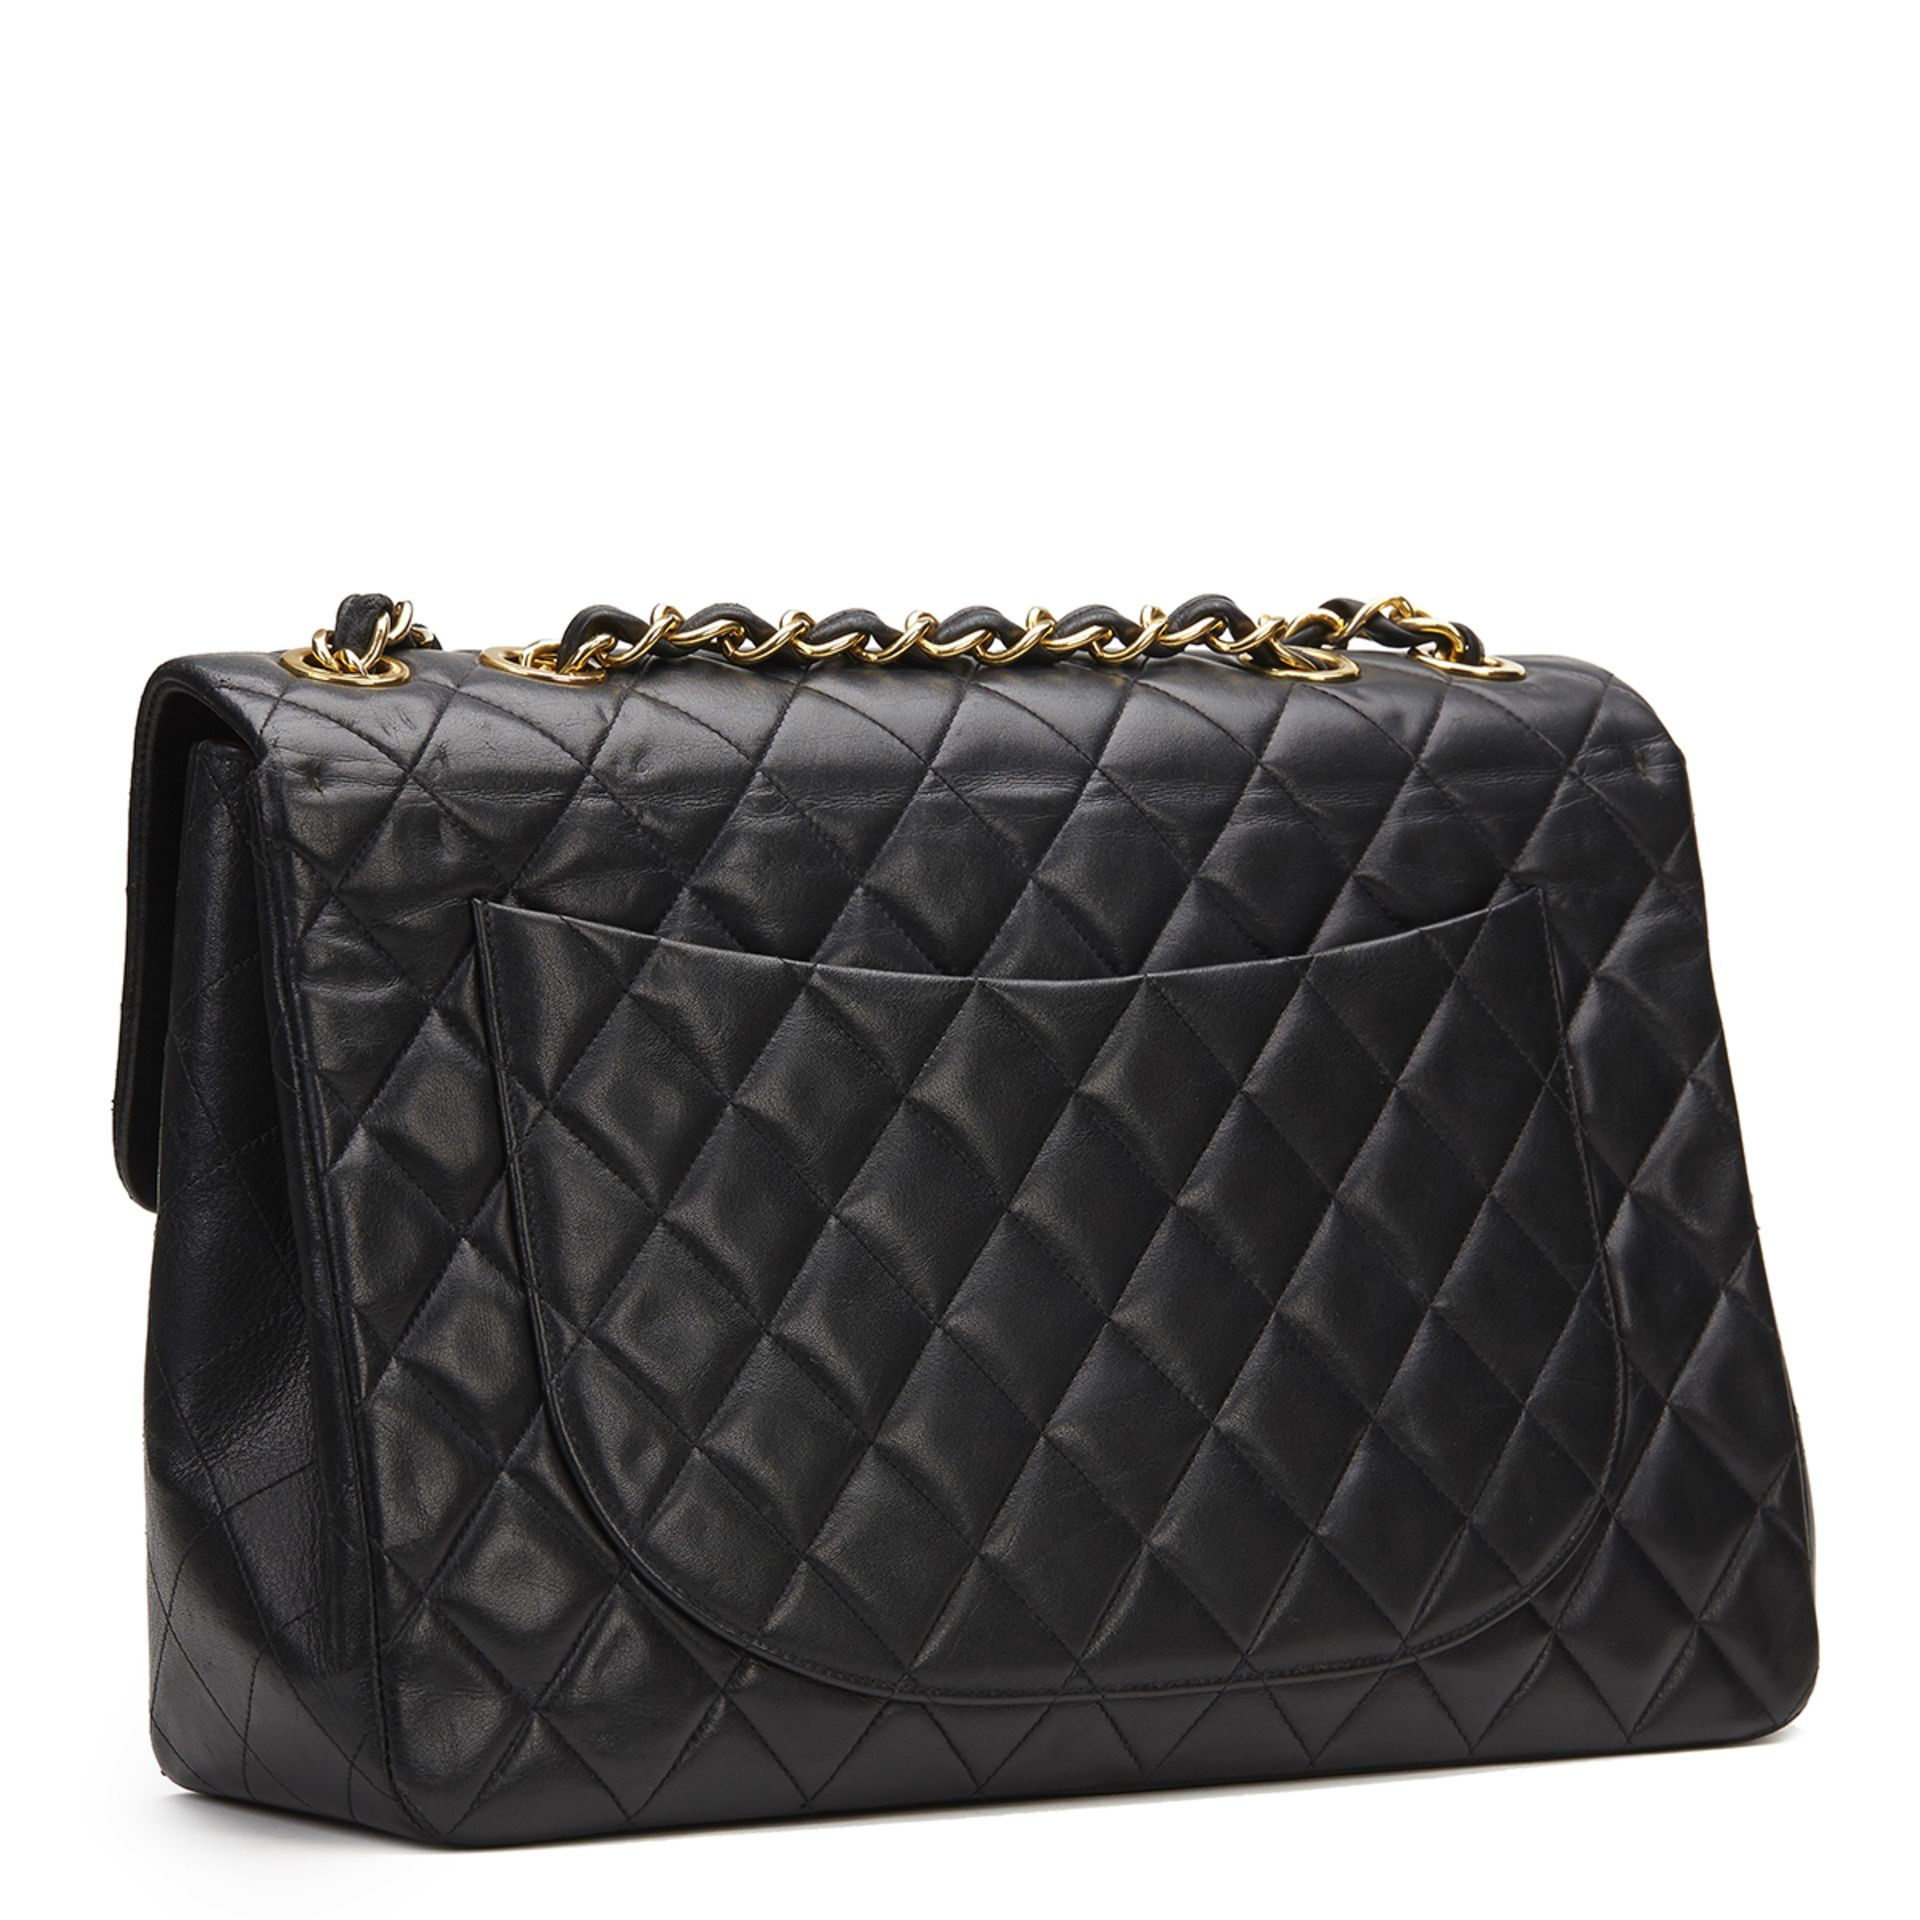 Chanel Black Quilted Lambskin Vintage Maxi Jumbo XL Flap Bag - Image 3 of 13